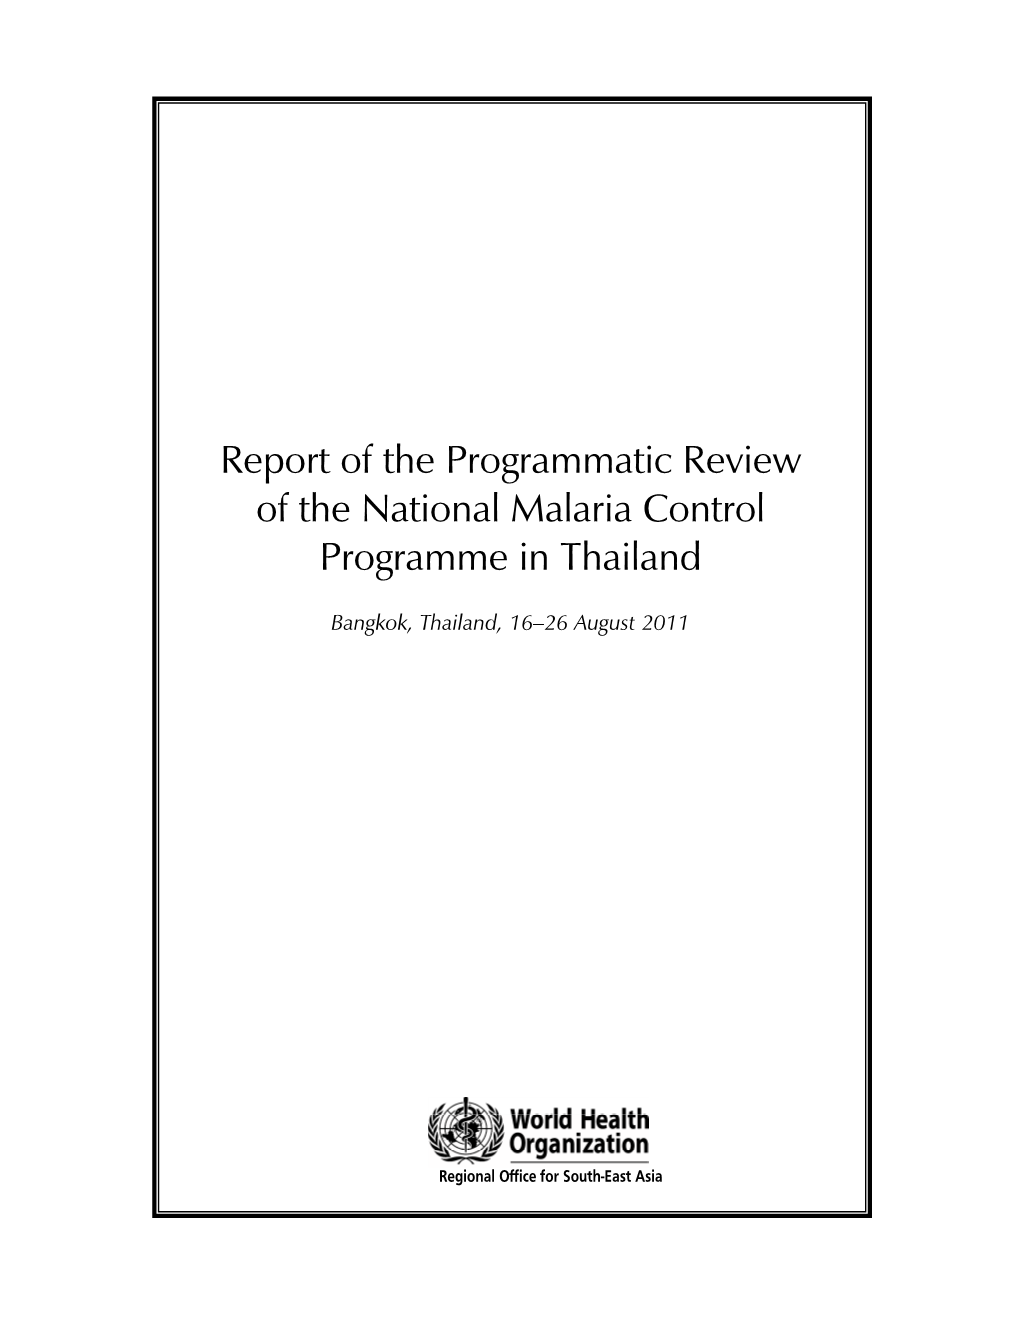 Report of the Programmatic Review of the National Malaria Control Programme in Thailand